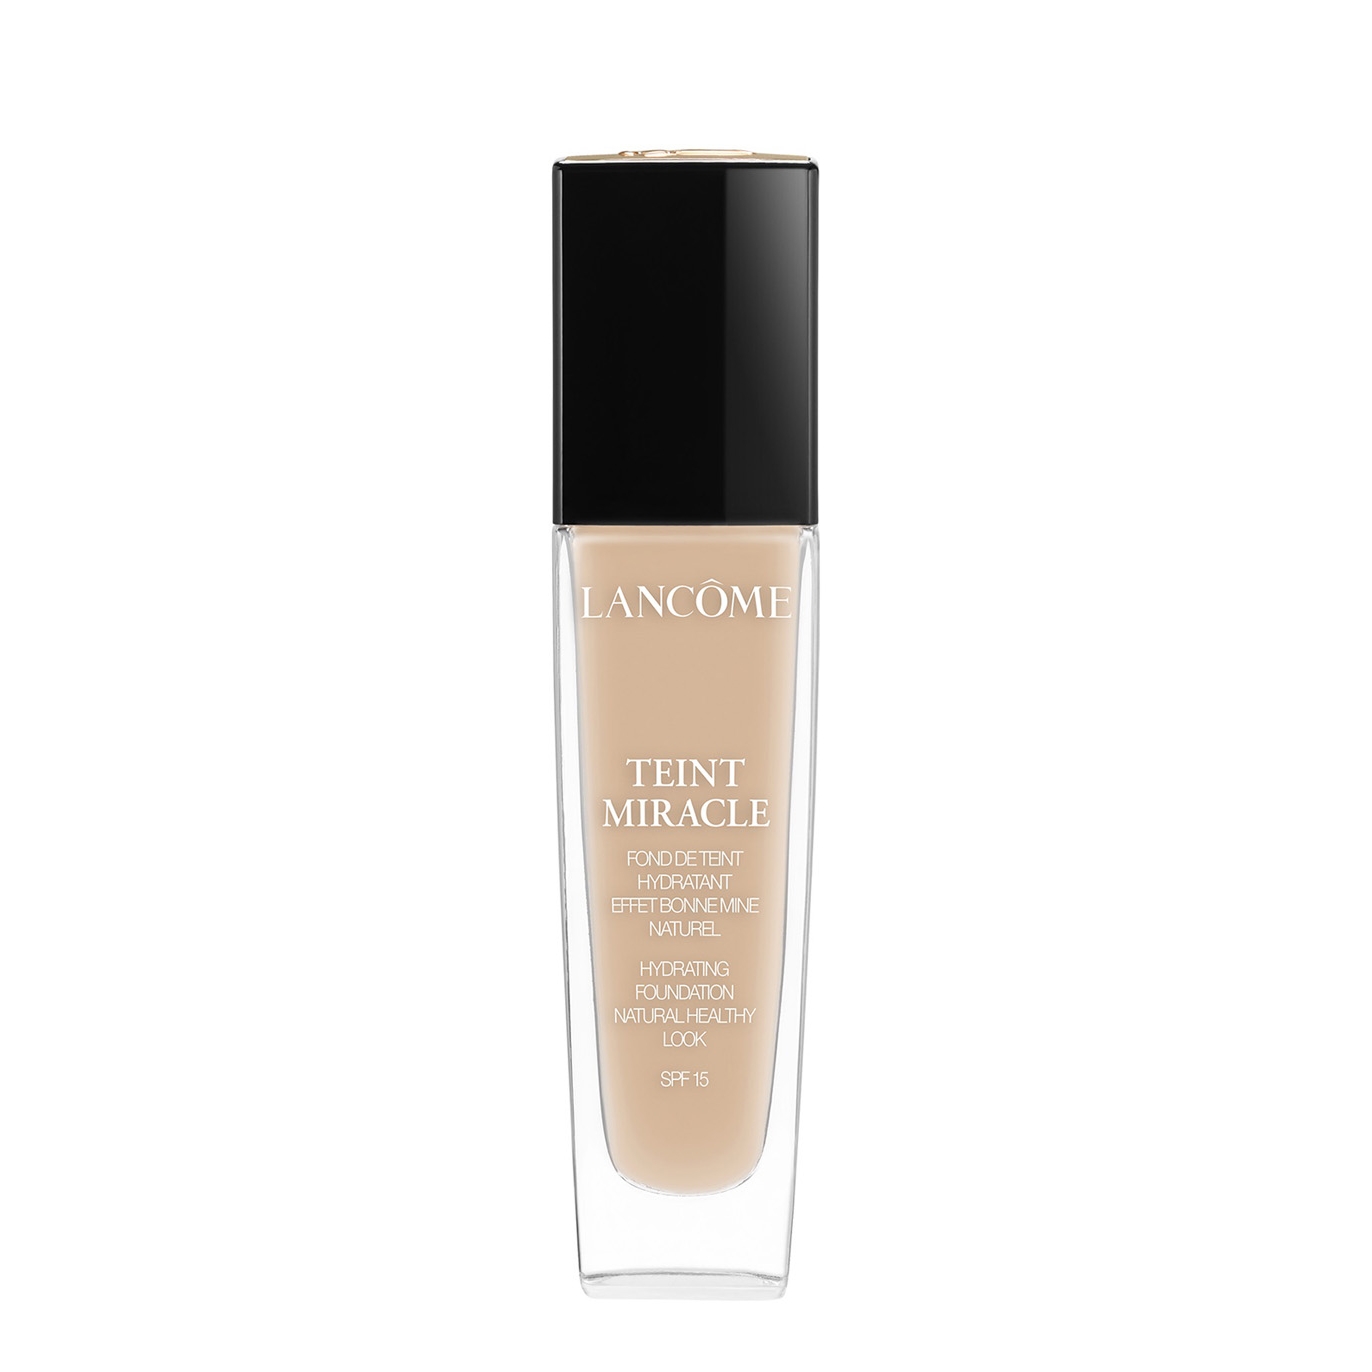 Lancôme Teint Miracle Foundation Spf15 In Neutral